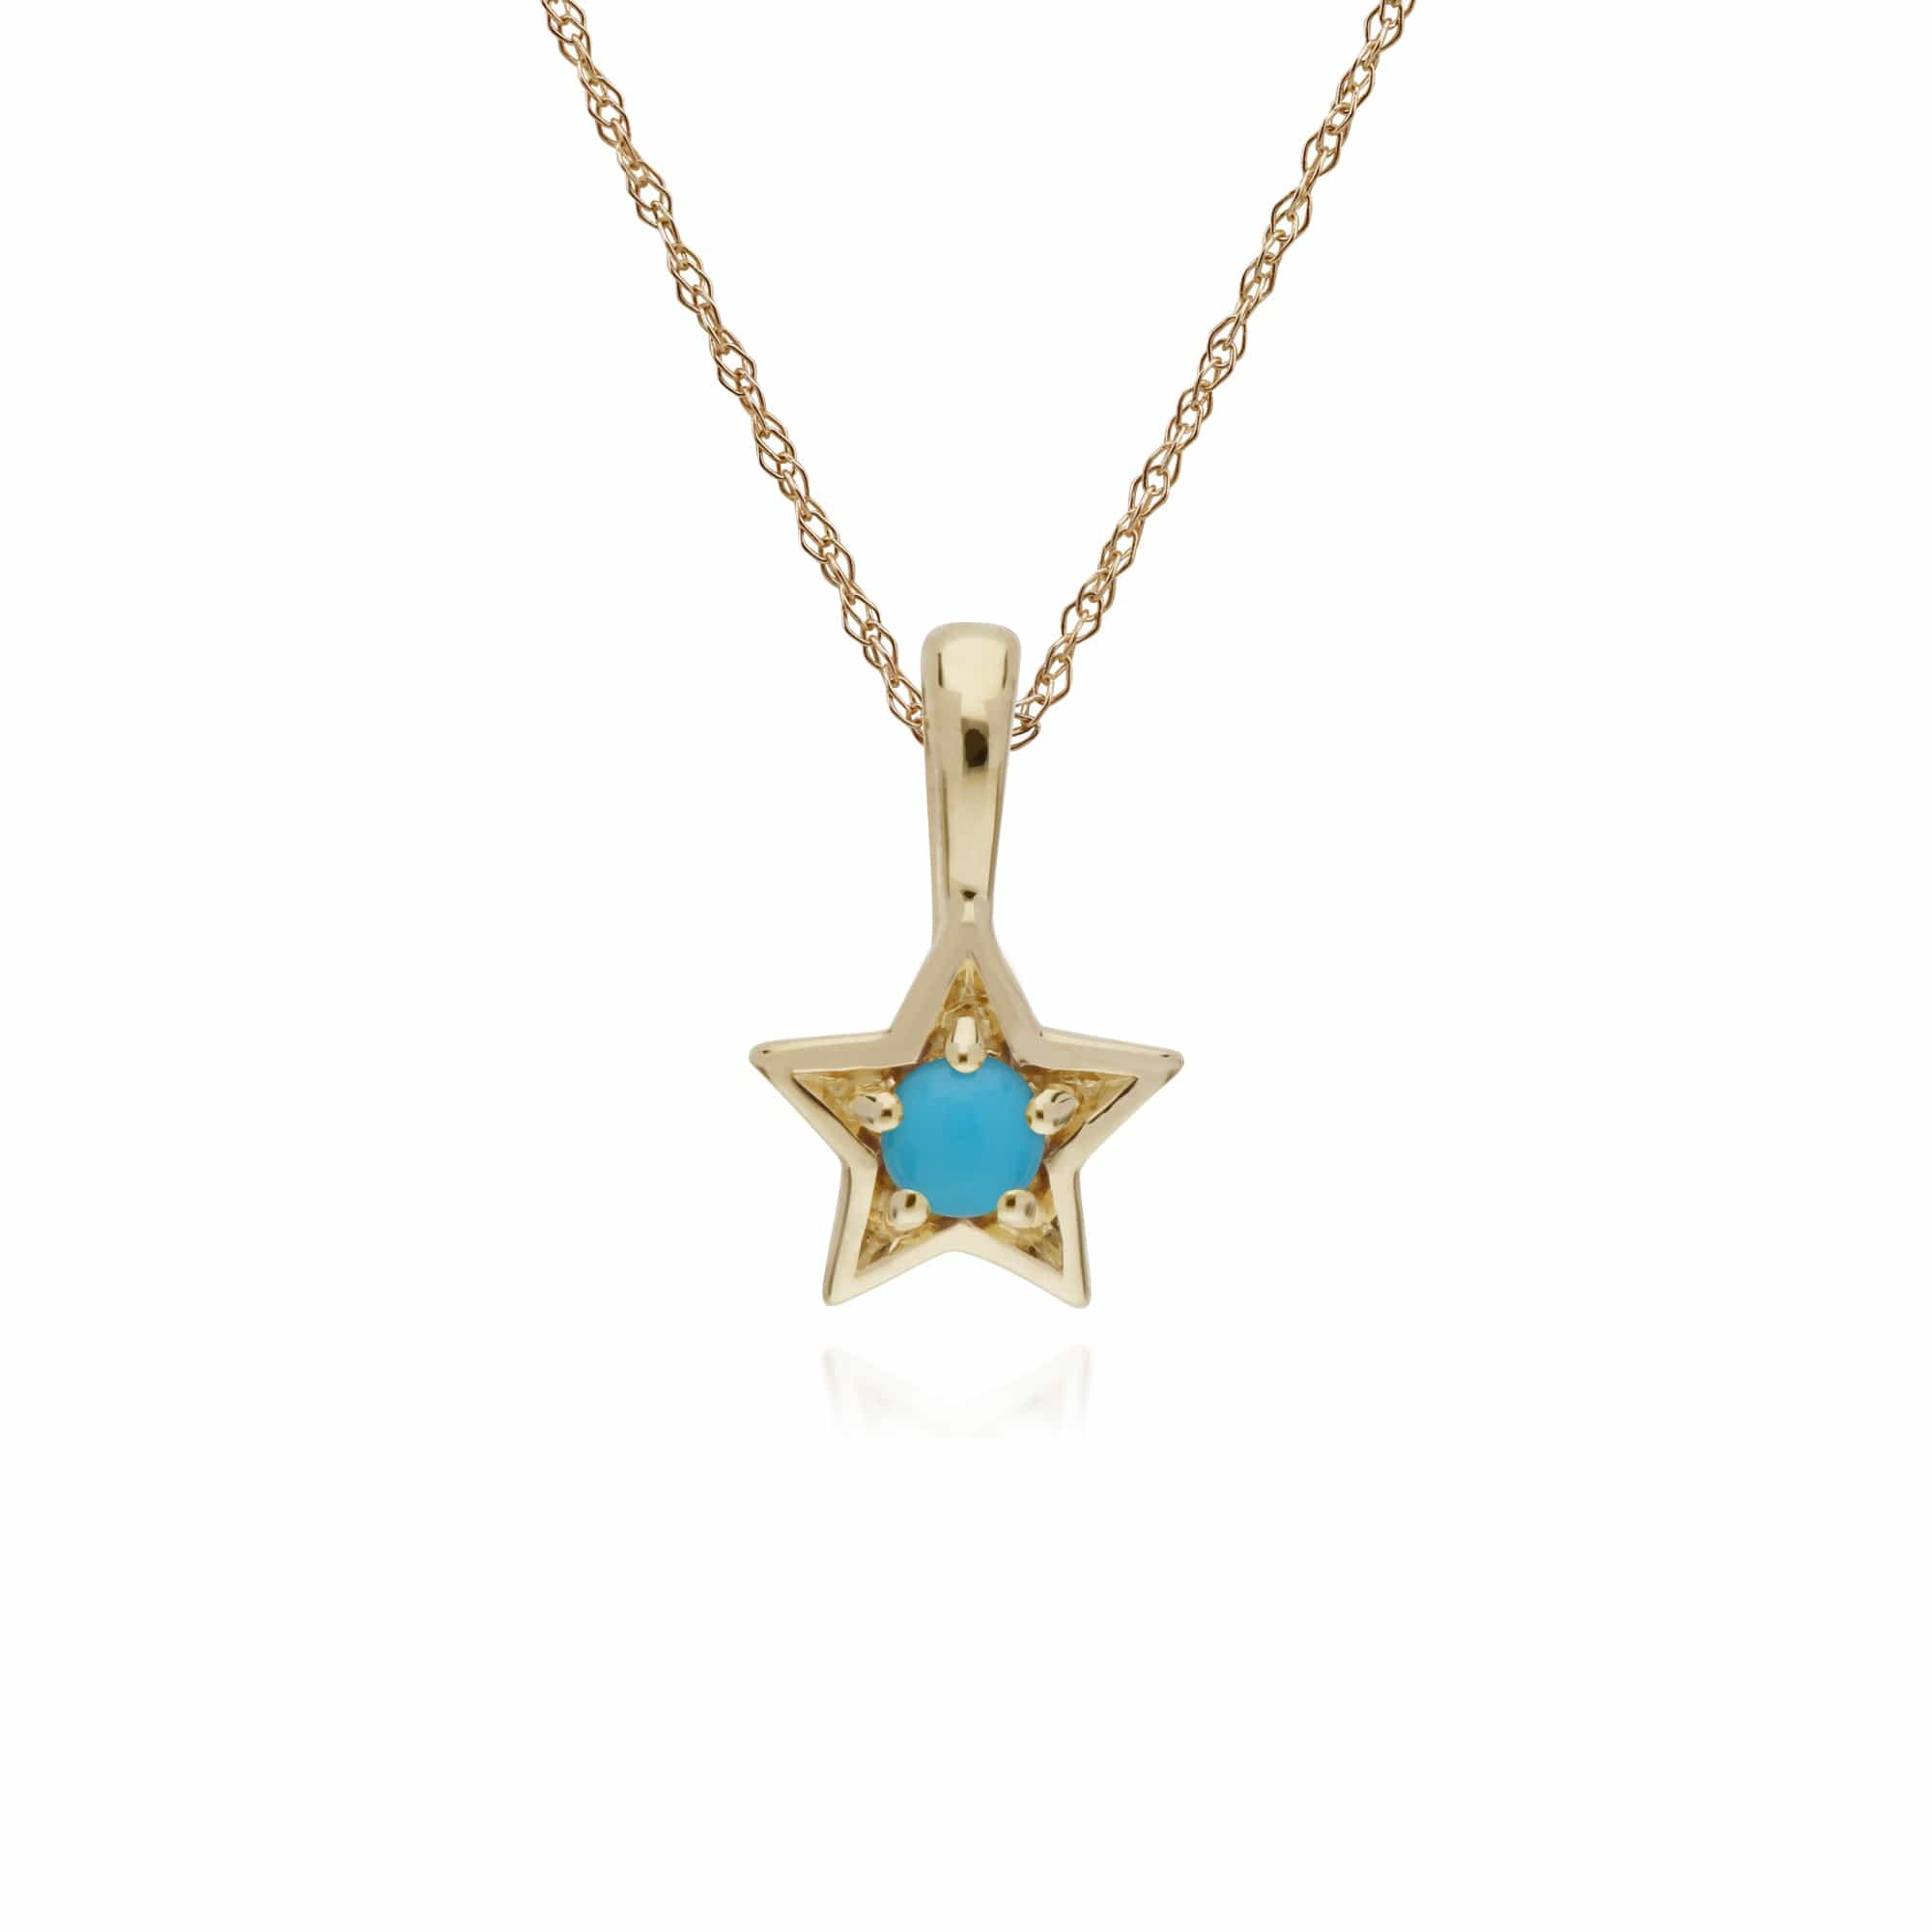 135E1565019-135P1903019 Contemporary Round Turquoise Single Stone Star Earrings & Necklace Set in 9ct Yellow Gold 3